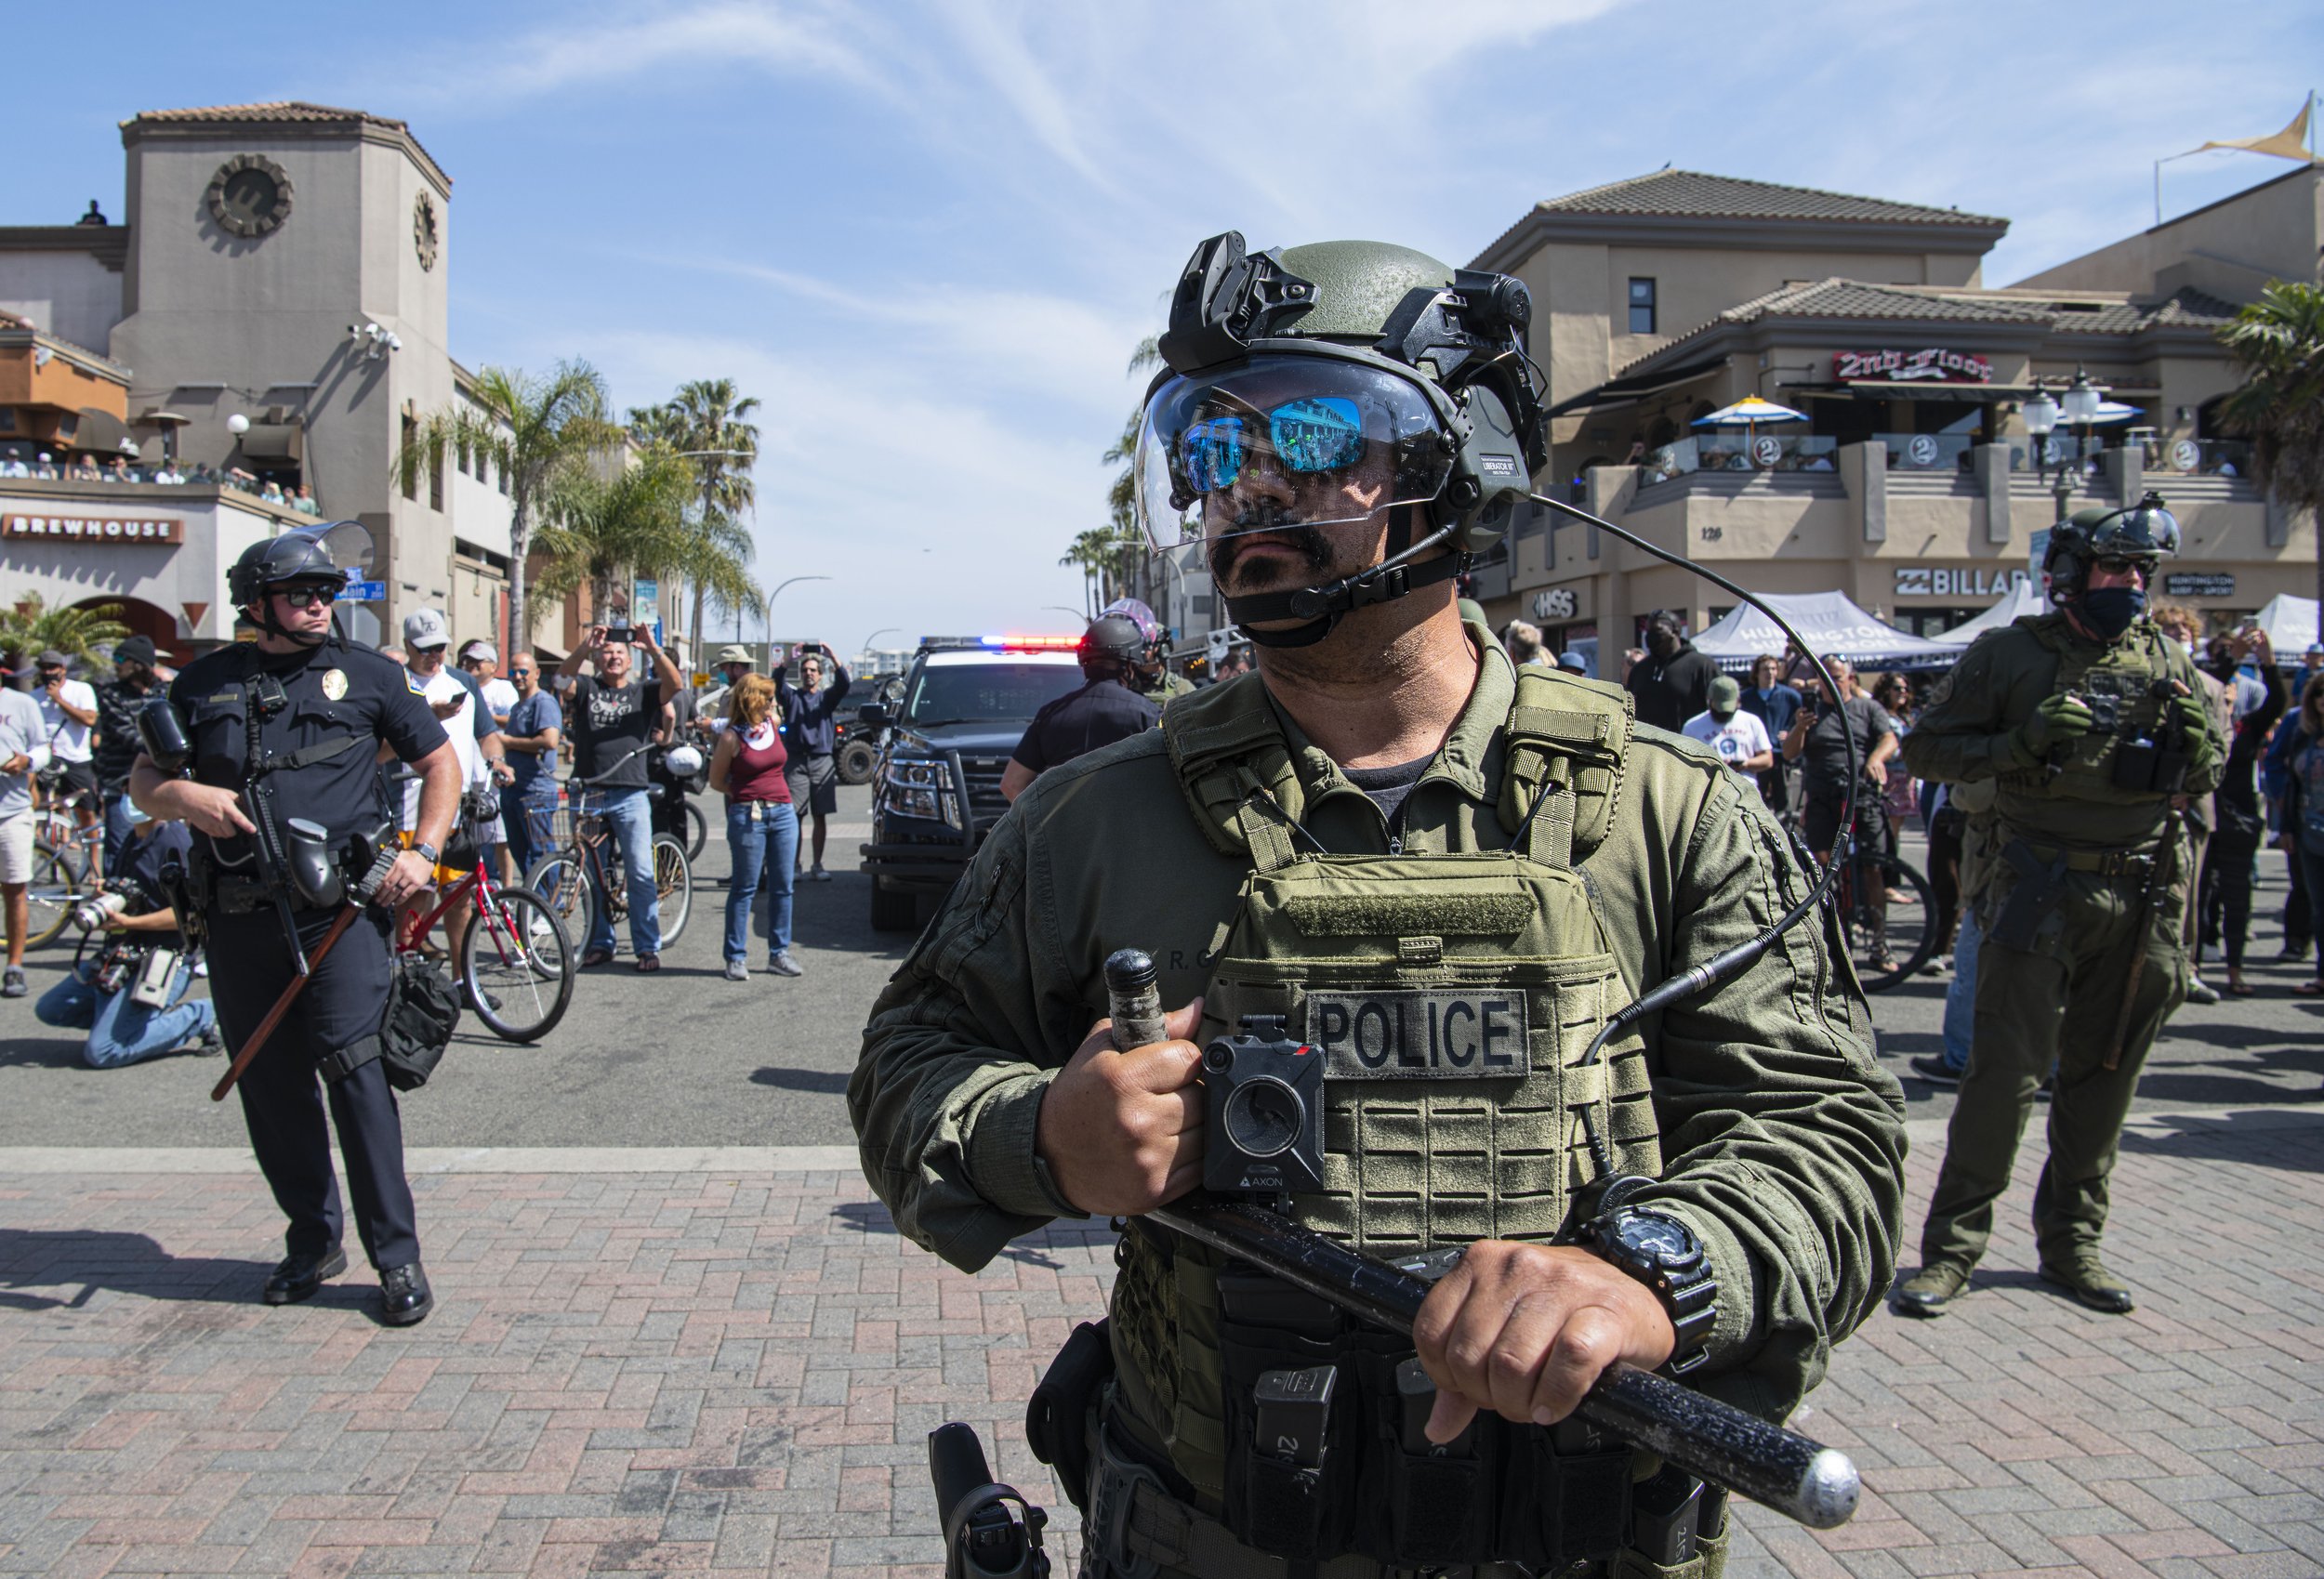  Huntington Beach Police officers assemble to dispurse the angry crowds at the Black Lives Matter/ White Lives Matter protest held in Huntington Beach Calif. on March 11, 2021. 